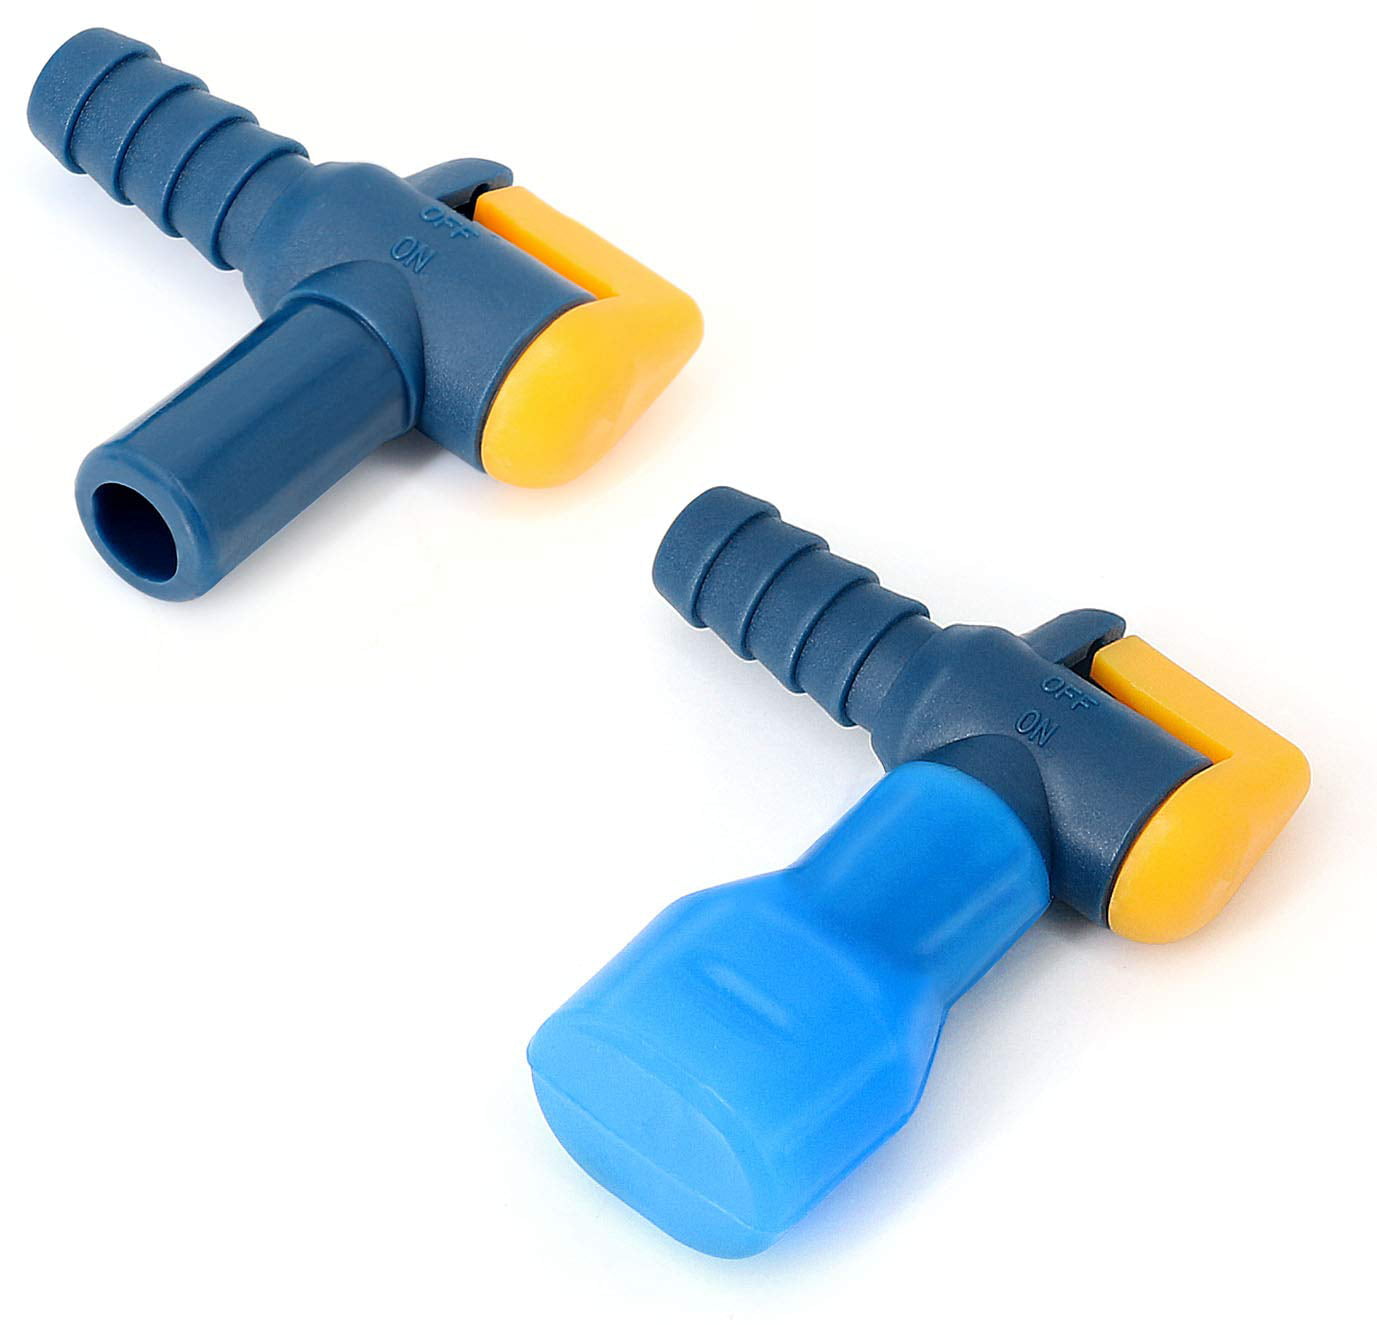 Replacement Bite Valve for Hydration Bladders - The Day Hiker